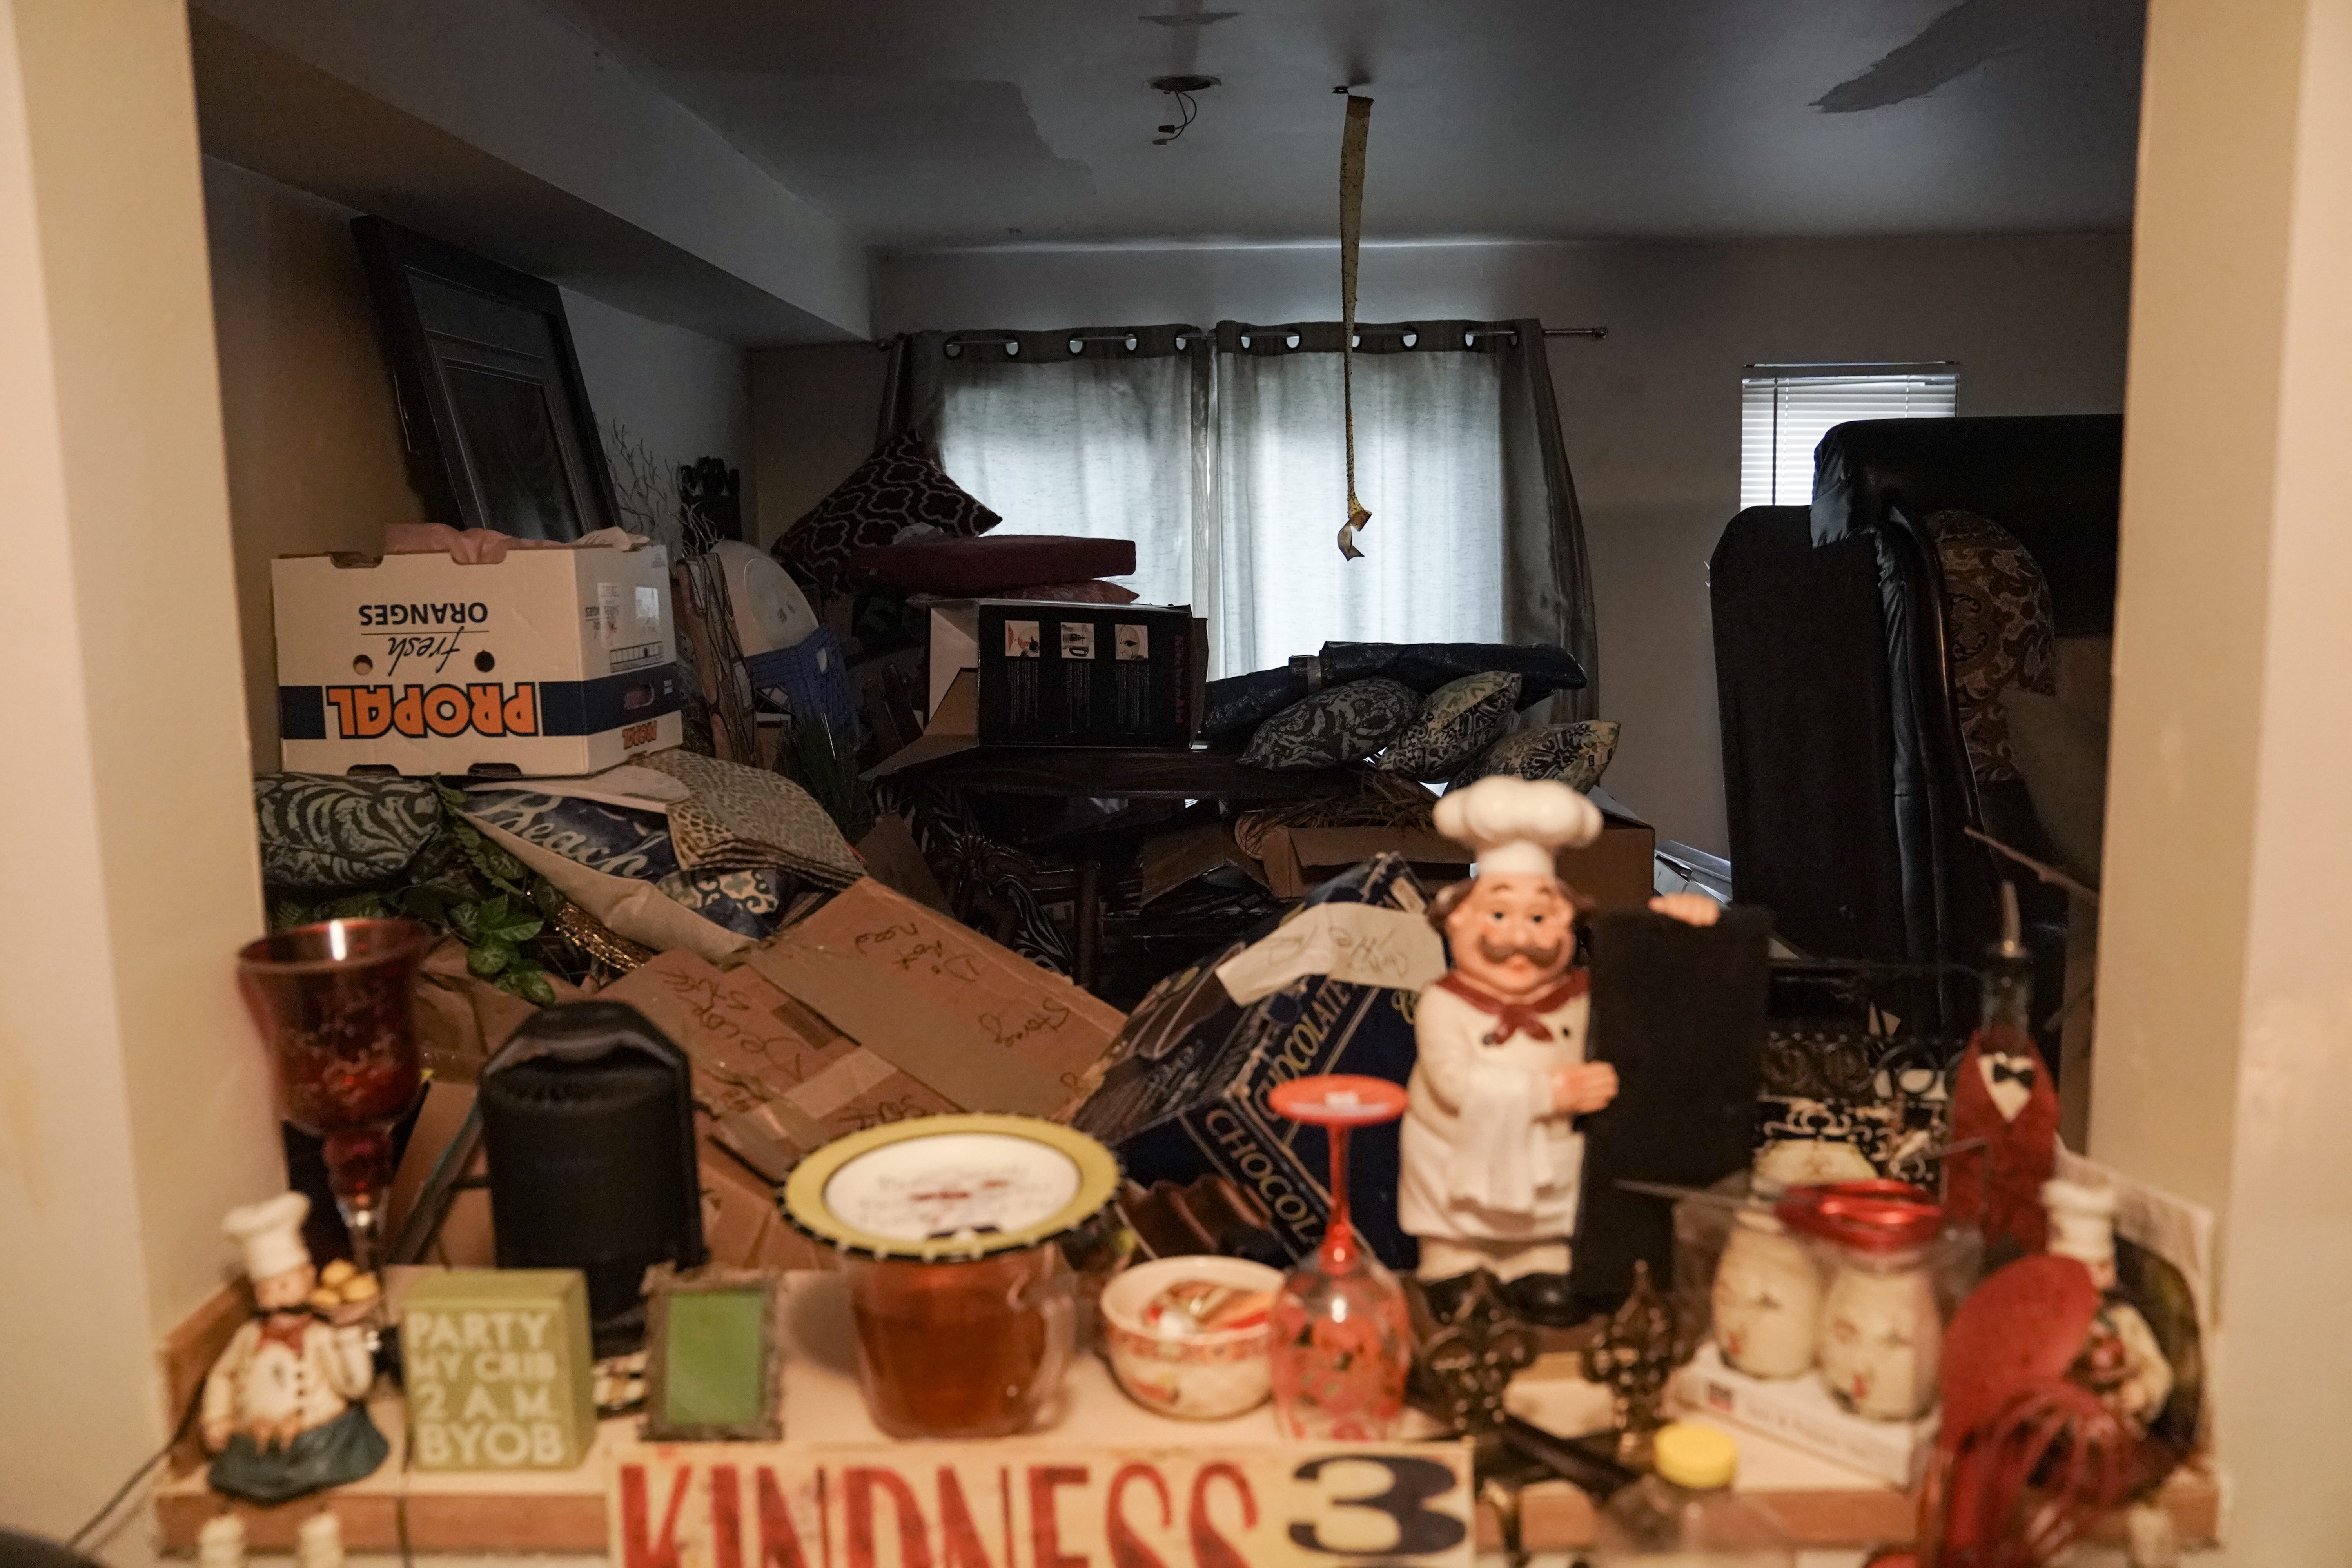 Five months after Nicole Chambers' eviction, boxes and furniture fill the living room of the only apartment she was able to find with a fresh eviction on her record. The apartment has no heat, no hot water in one of the bathrooms and no yard.